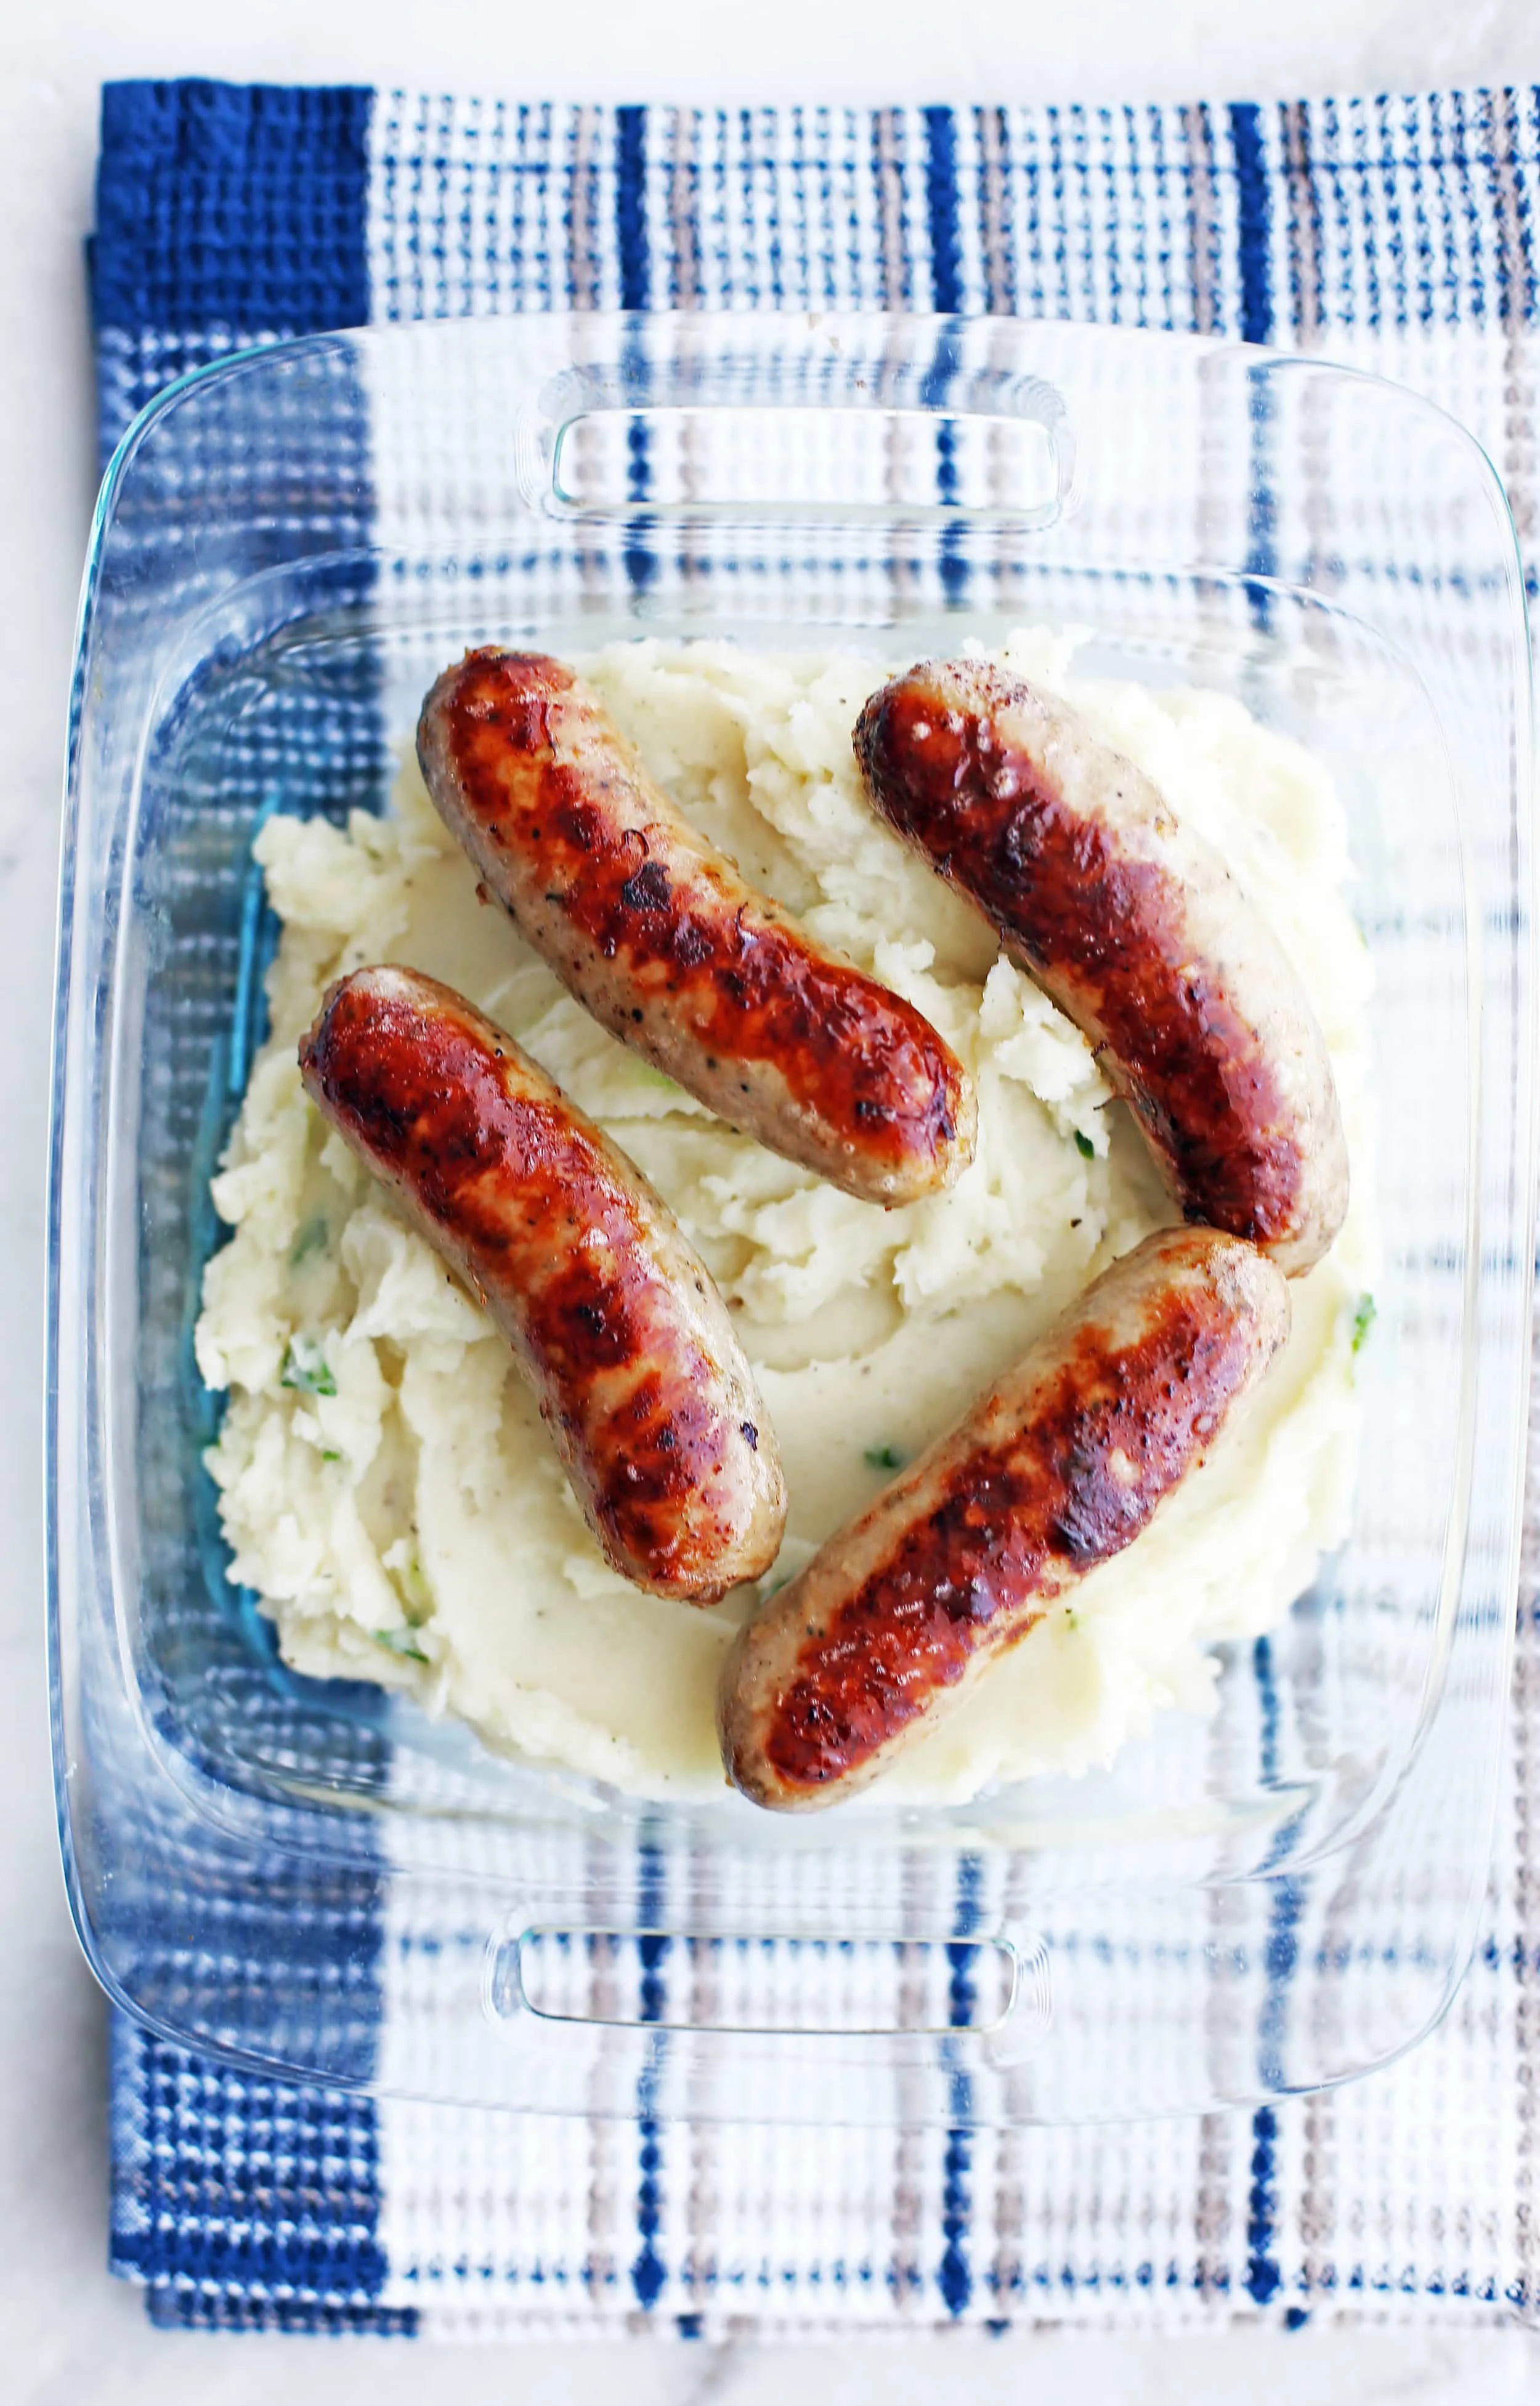 Creamy mashed potatoes with four cooked golden-brown pork sausages on top in a glass square dish.